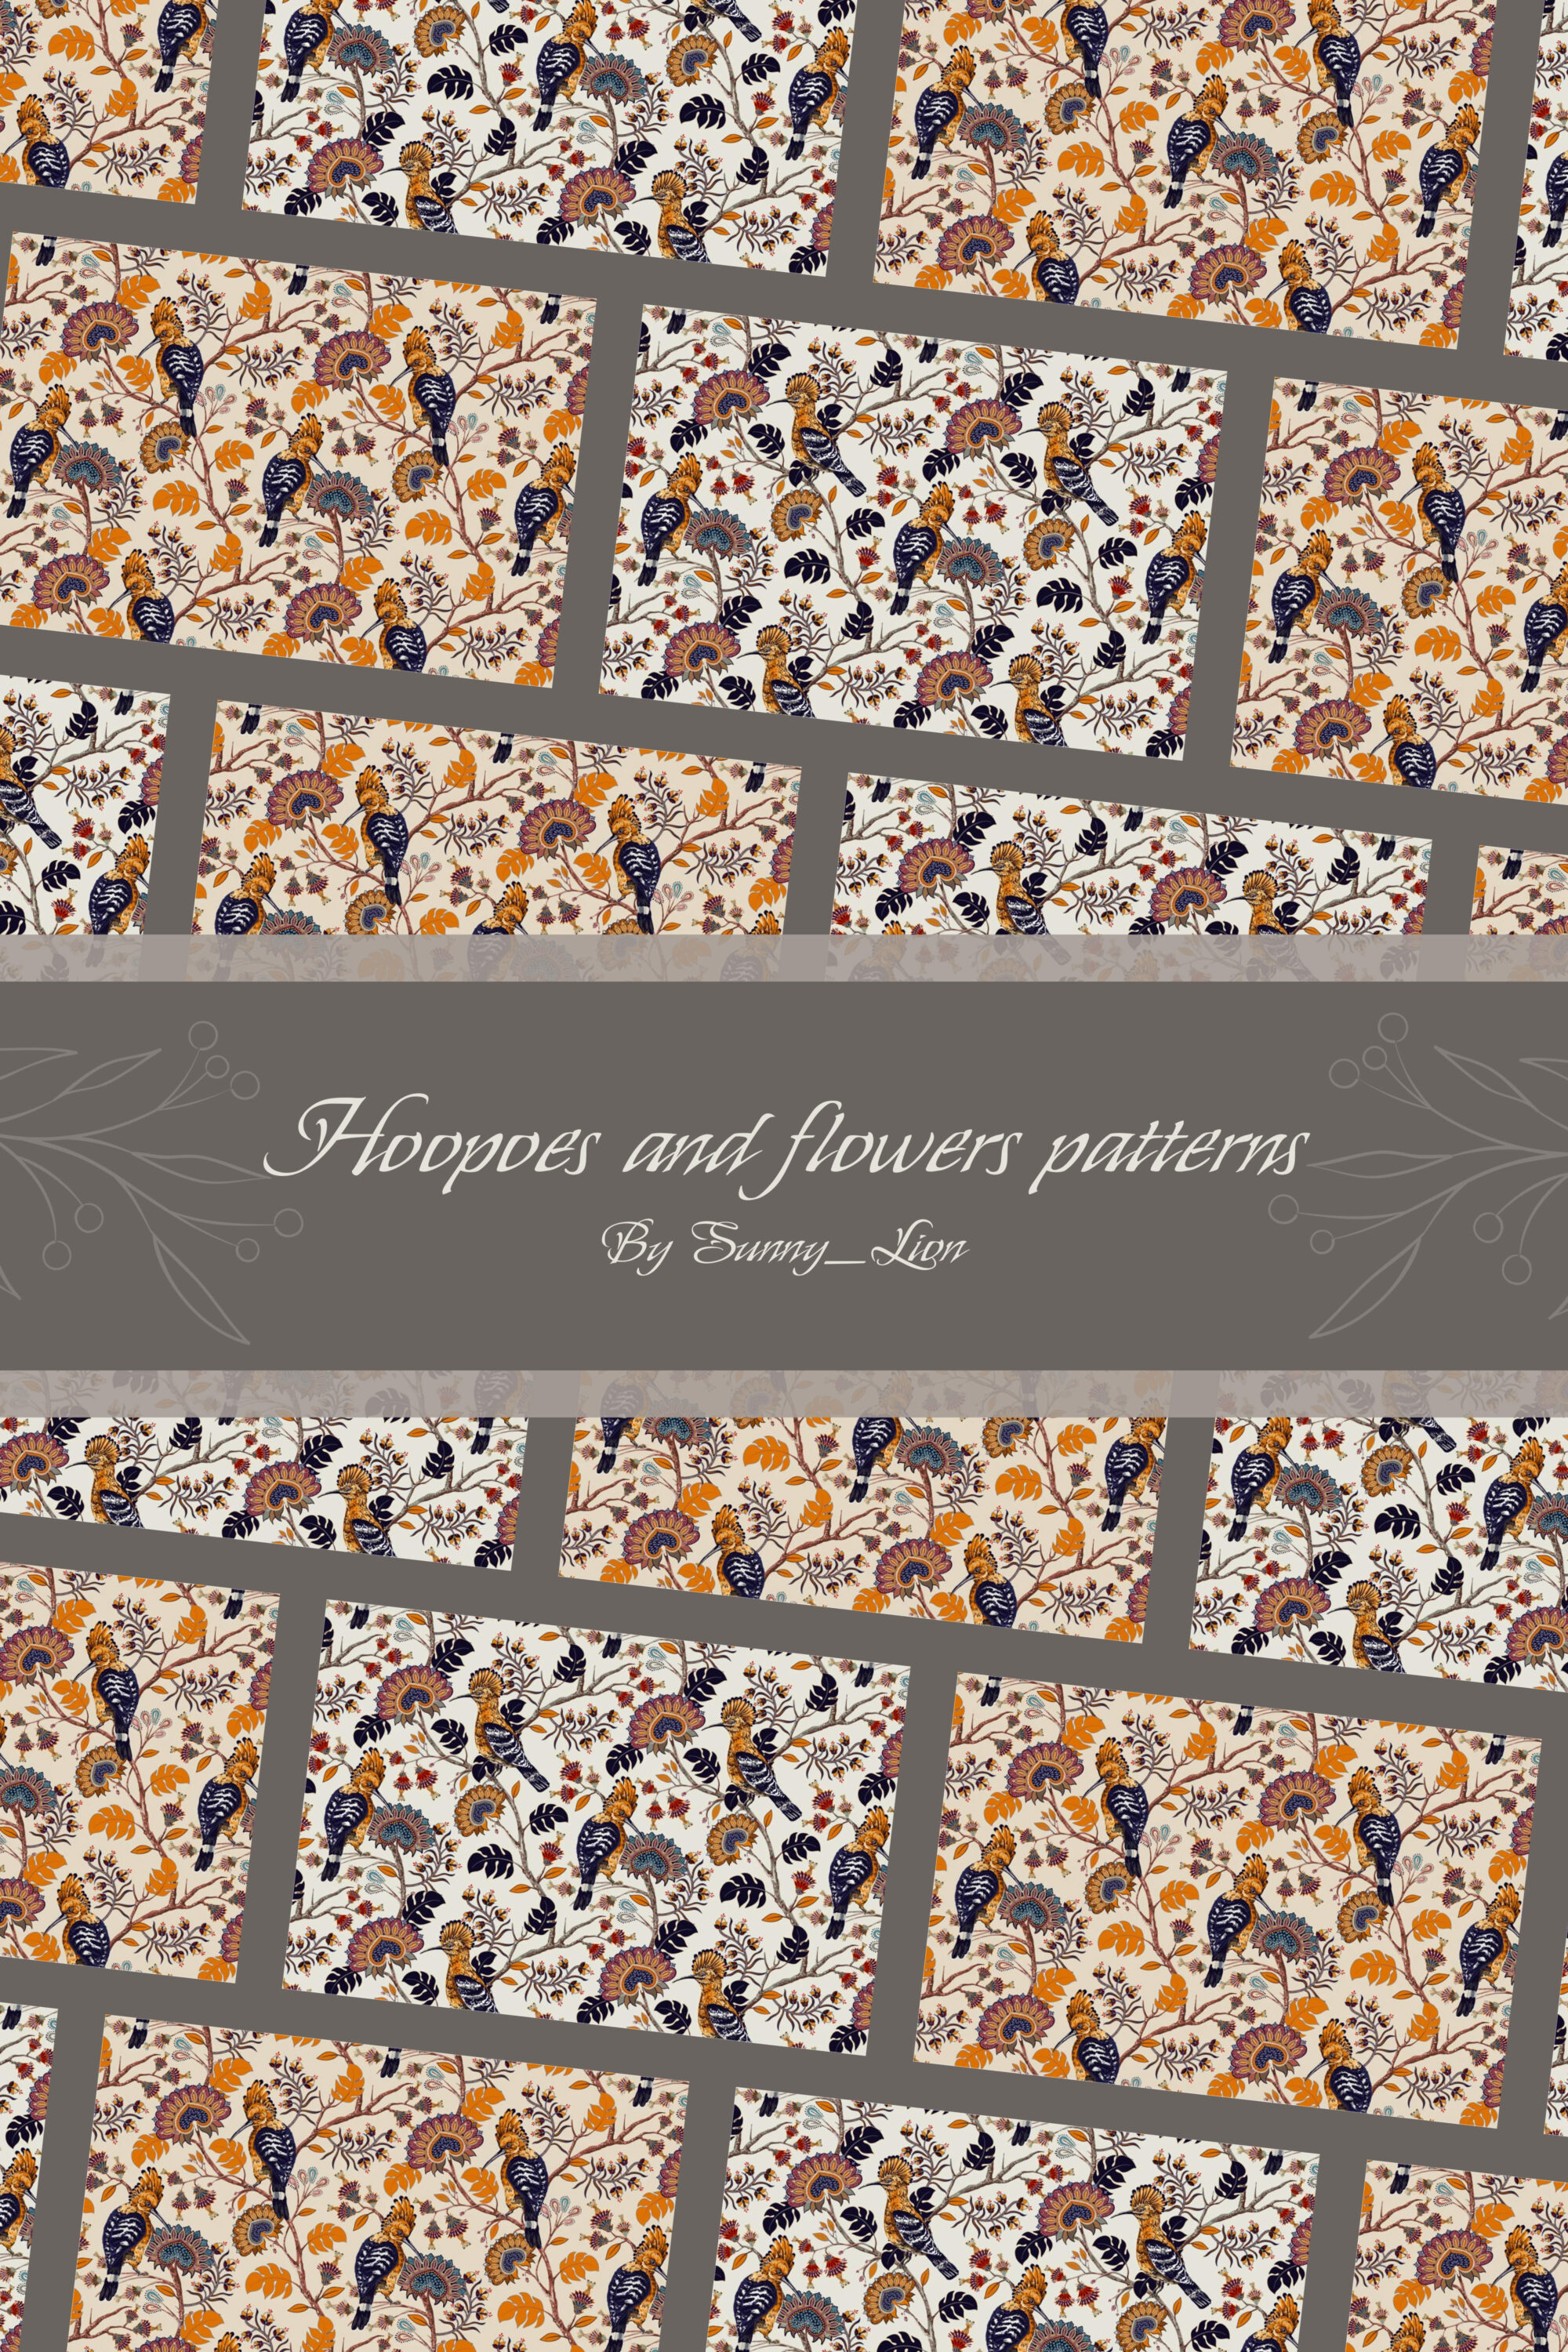 Hoopoes and Flowers Patterns pinterest image.